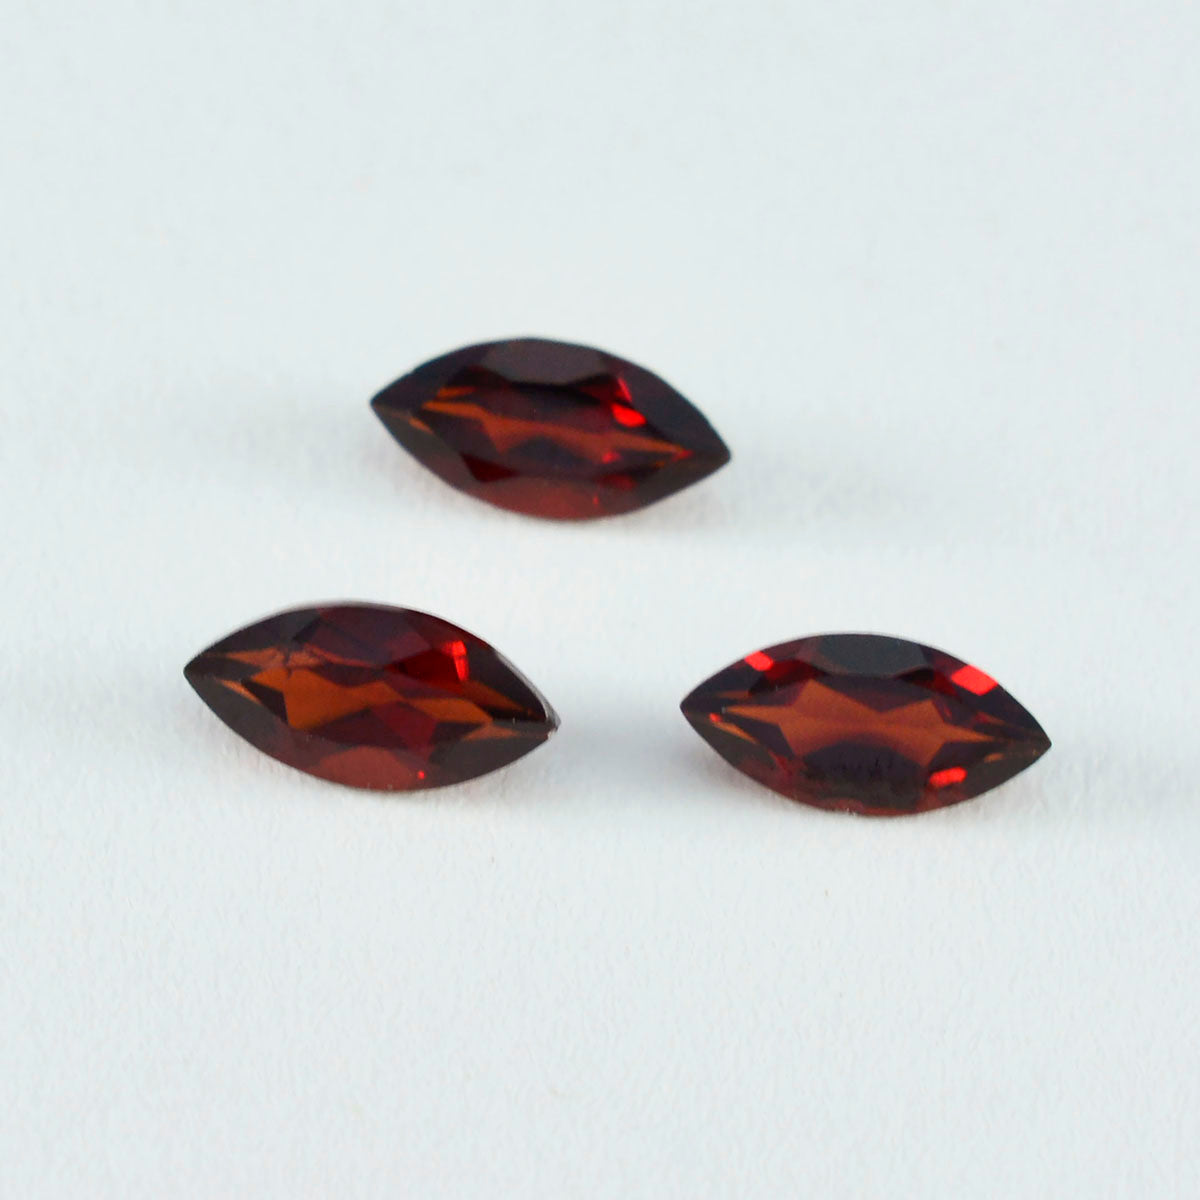 Riyogems 1PC Real Red Garnet Faceted 6x12 mm Marquise Shape beauty Quality Gems